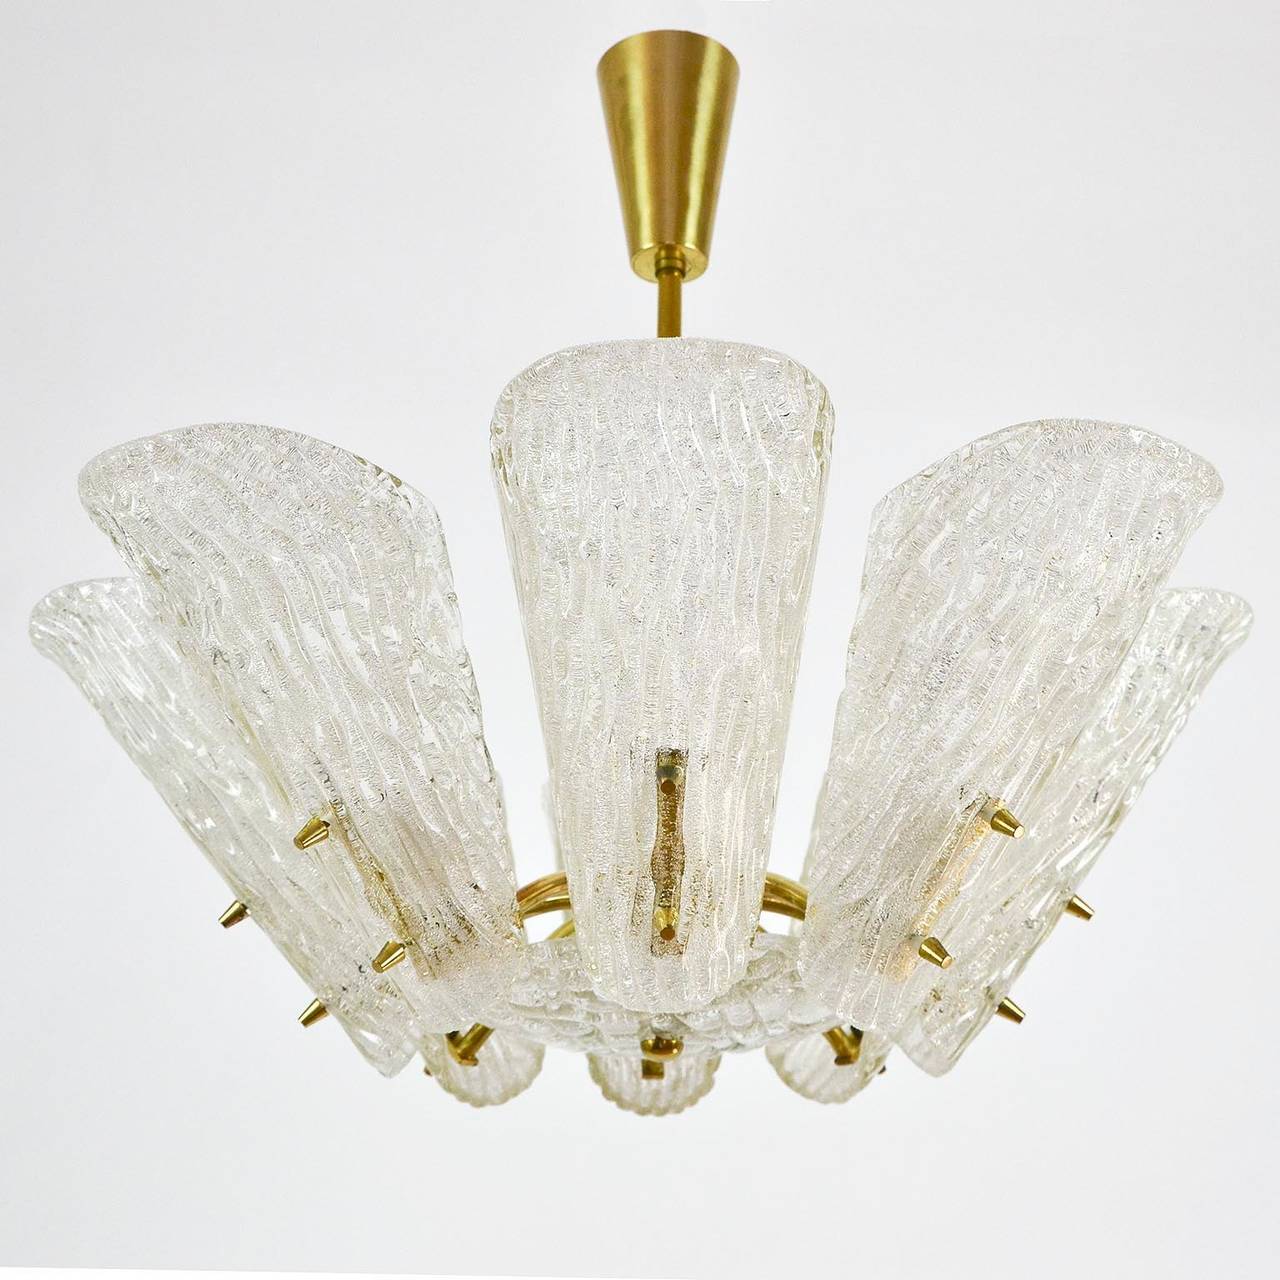 A Viennese glass and brass chandelier by J.T. Kalmar from the 1950s. 
The light features eight arms with sockets for small Edison base E14 bulbs (max. 40W per bulb) or LEDs covered with pressed glass lamp shades.

Diameter: 23.6 in. (60 cm).
Height: